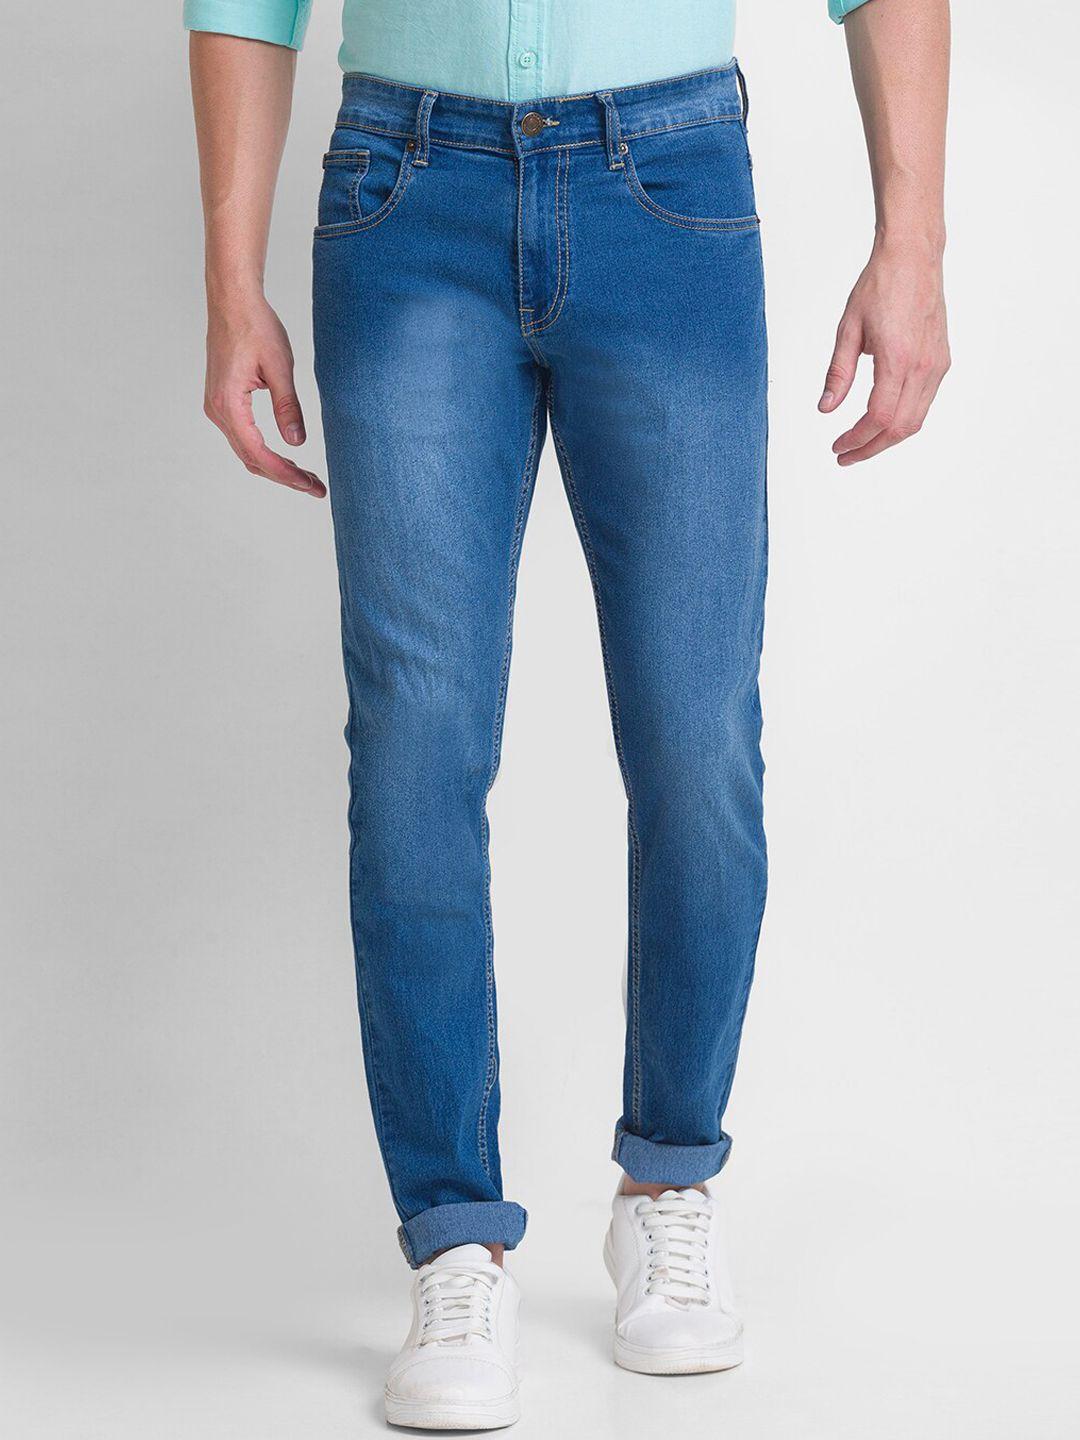 giordano-men-blue-slim-fit-high-rise-light-fade-stretchable-jeans